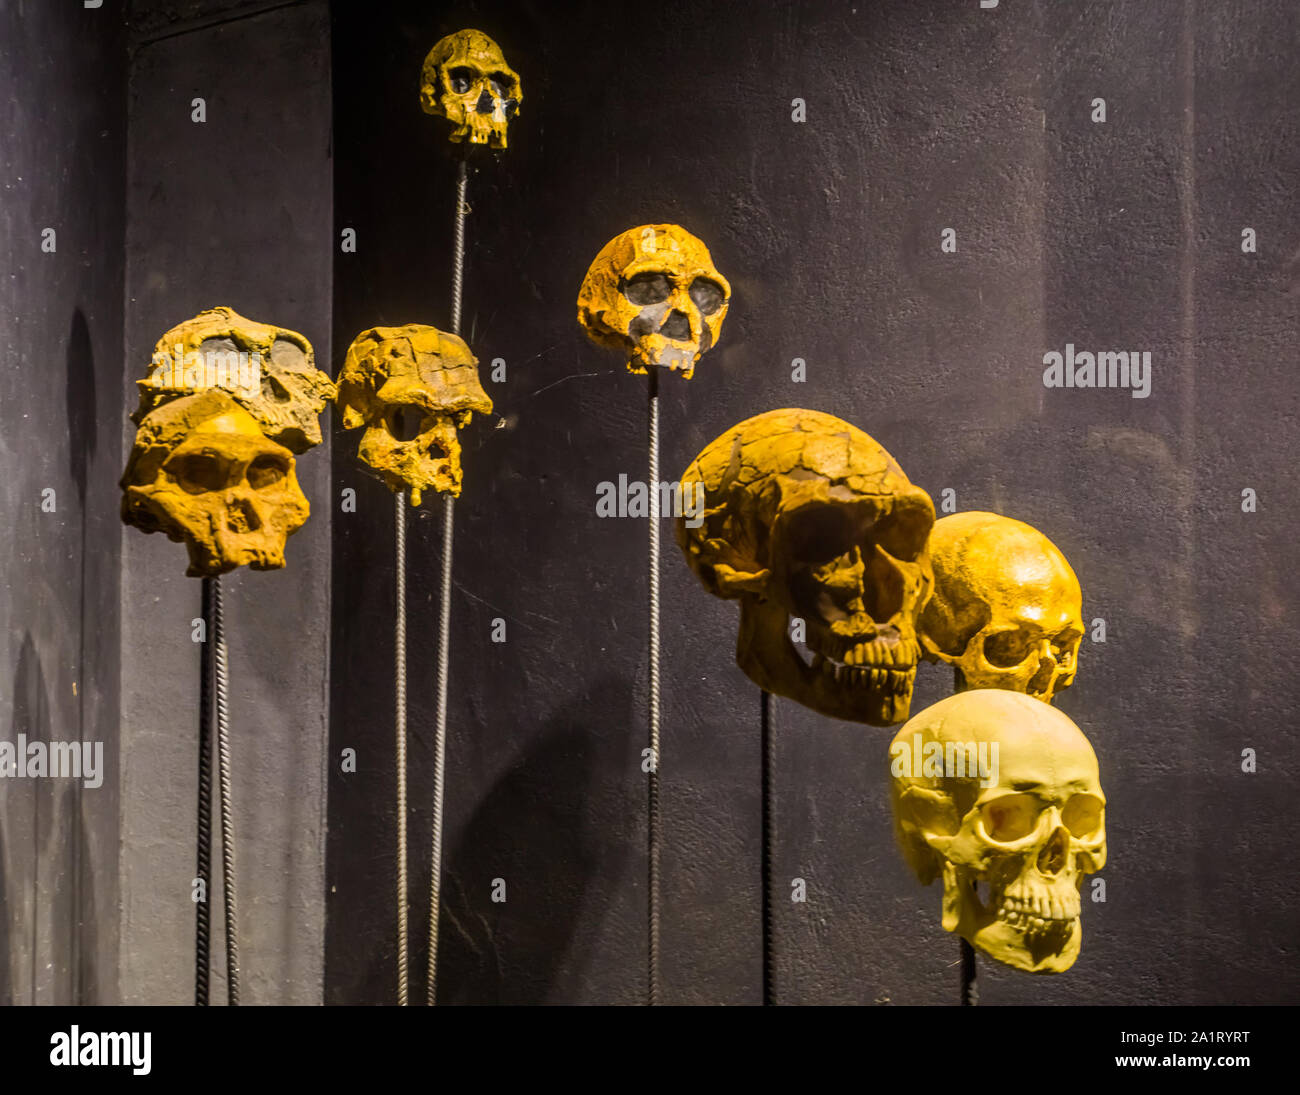 primate and human skulls on stakes, creepy halloween background Stock Photo